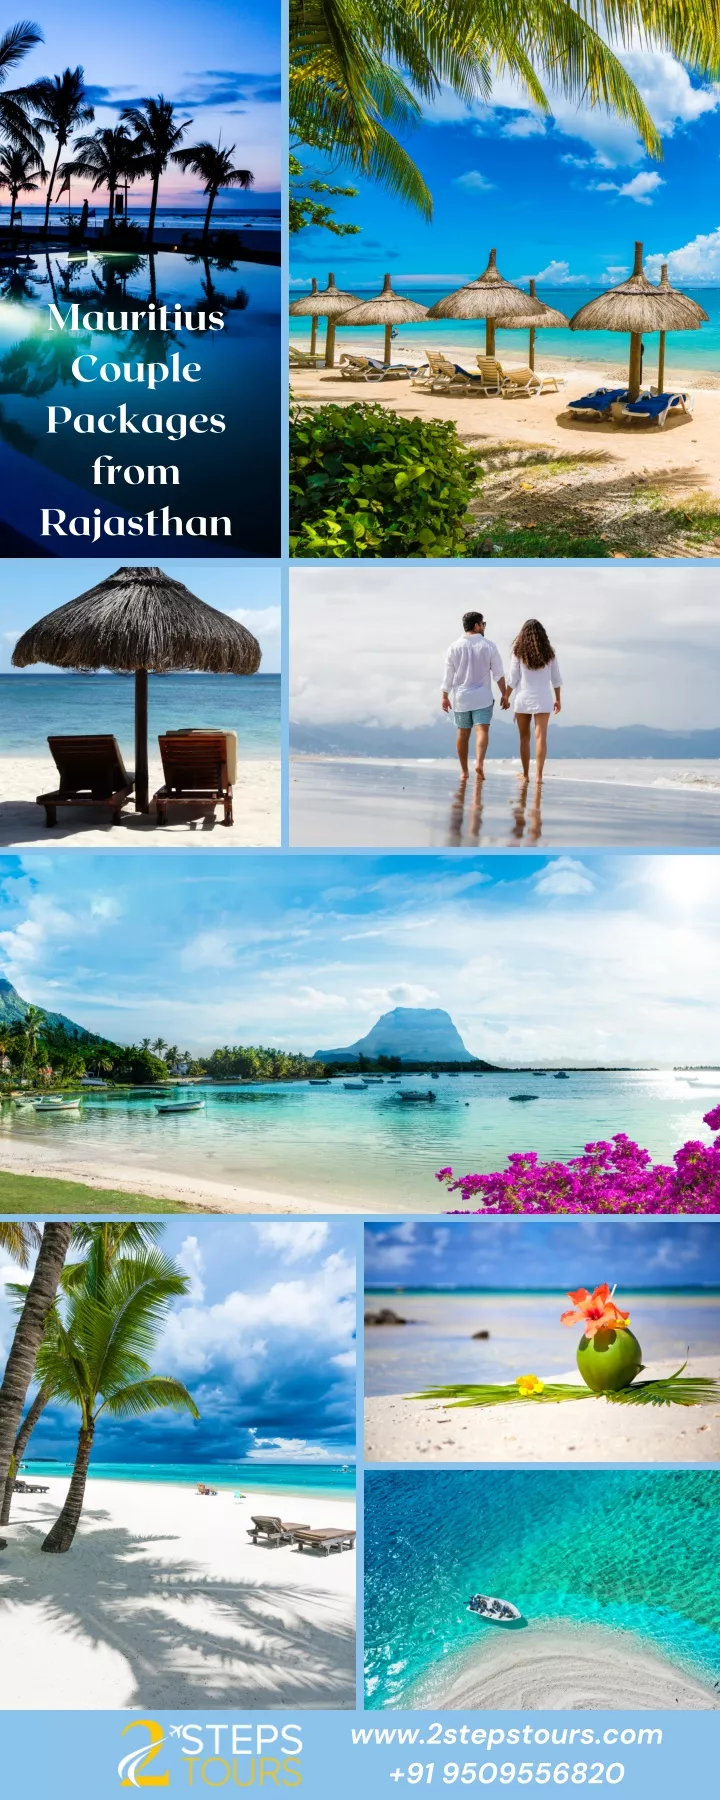 mauritius couple packages from rajasthan